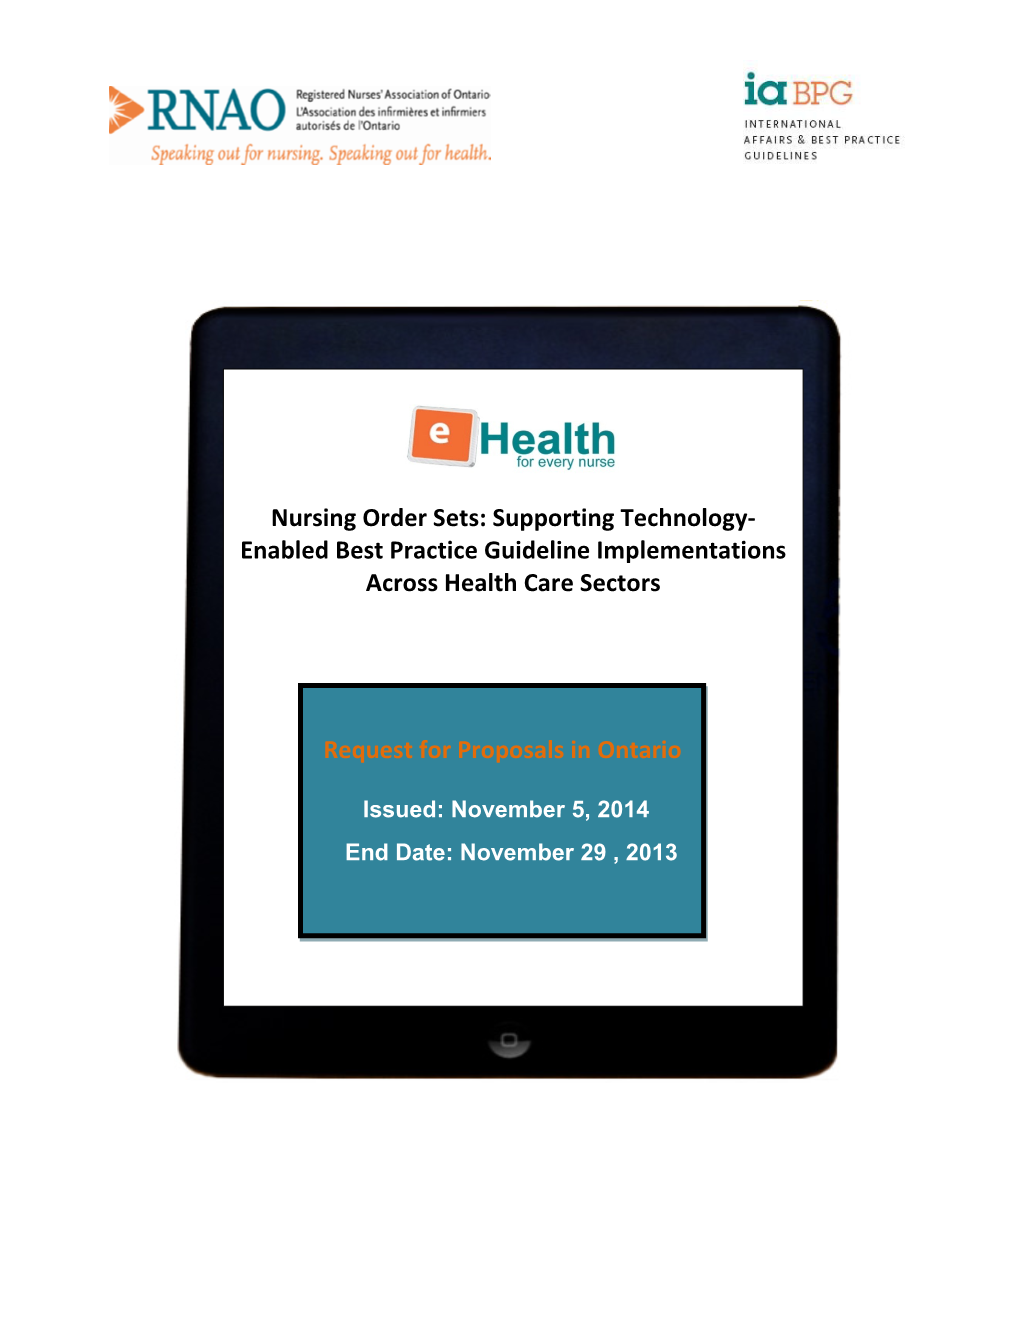 Nursing Order Sets: Supporting Technology- Enabled Best Practice Guideline Implementations Across Health Care Sectors